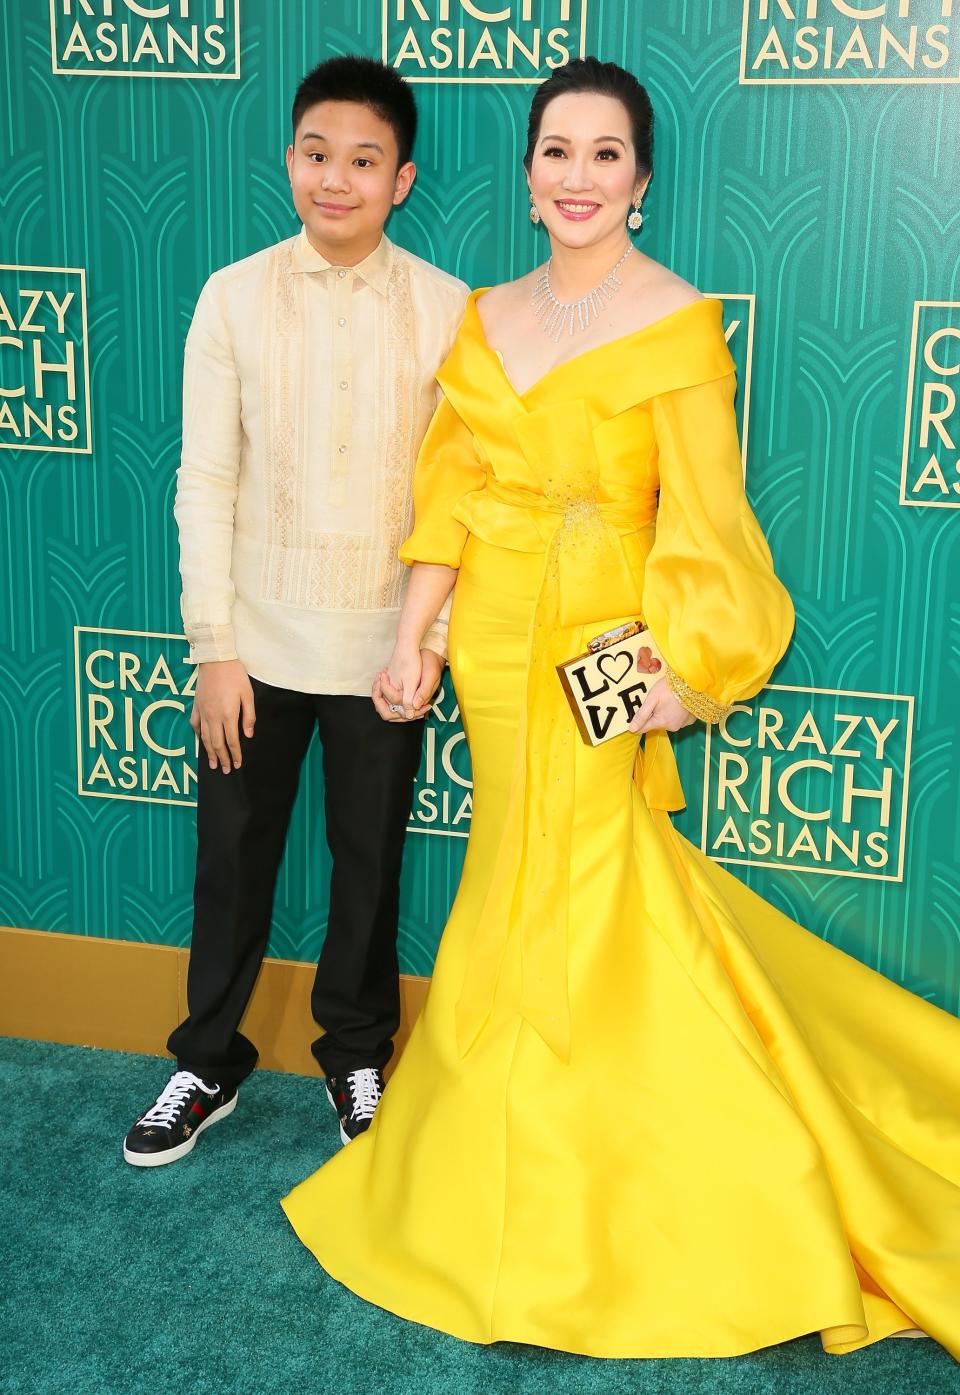 Actress Kris Aquino (right) and her son actor Bimby Aquino Yap (Photo: JEAN-BAPTISTE LACROIX via Getty Images)